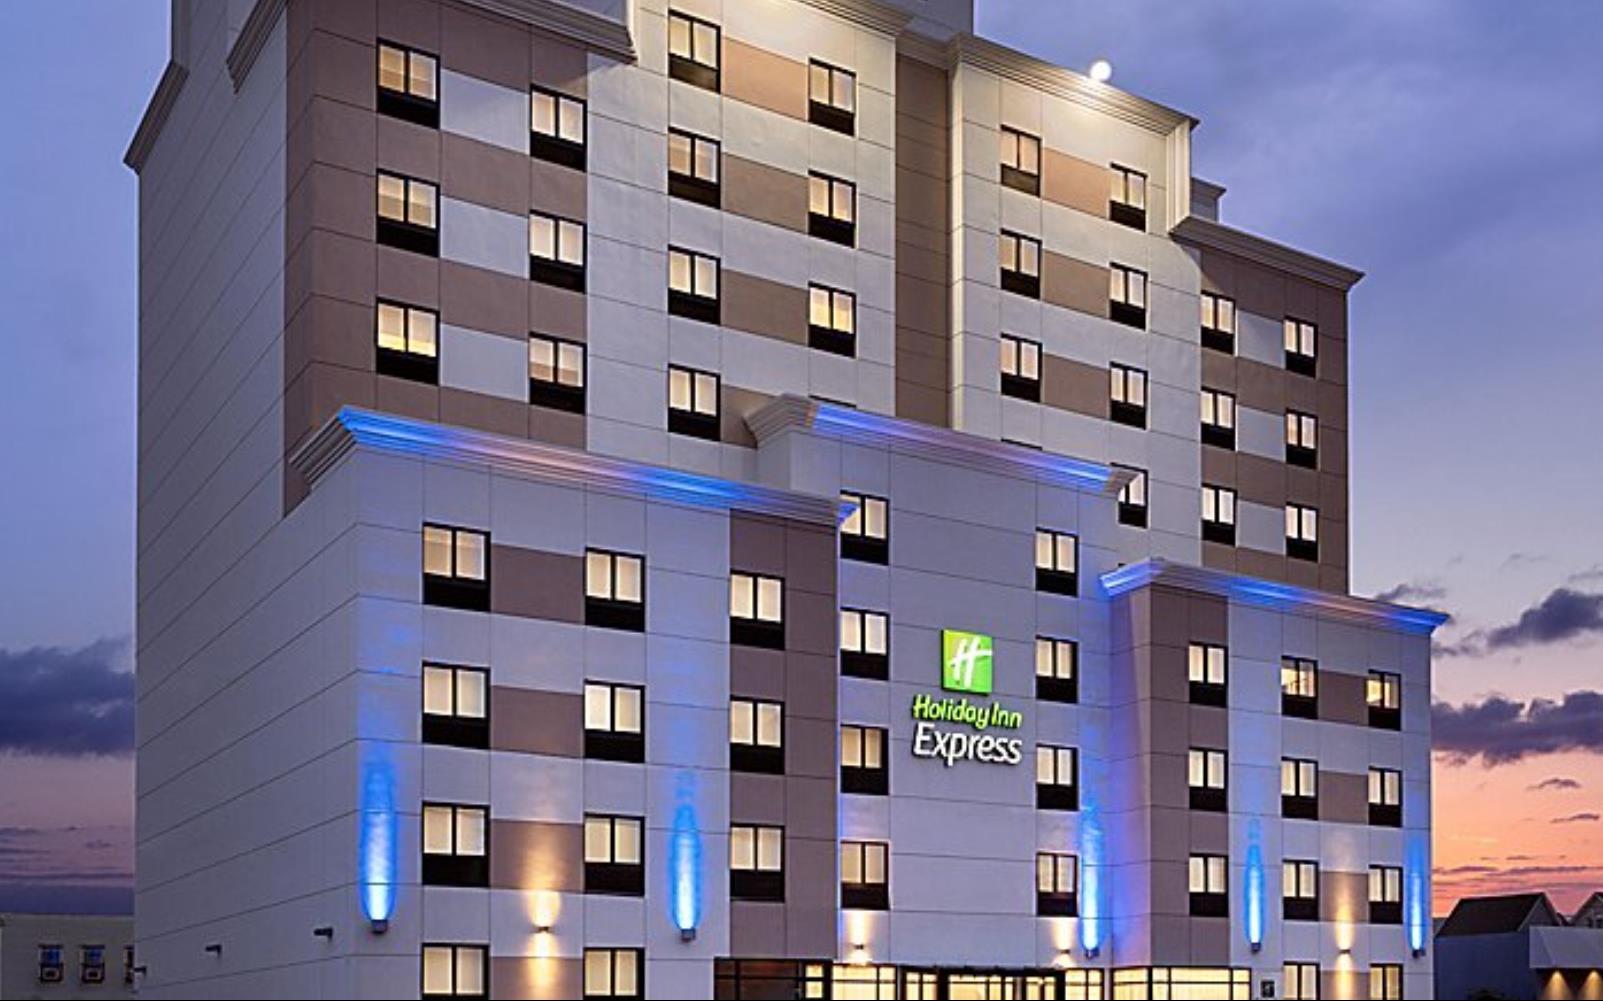 Holiday Inn Express Jamaica - JFK AirTrain - NYC in Queens, NY